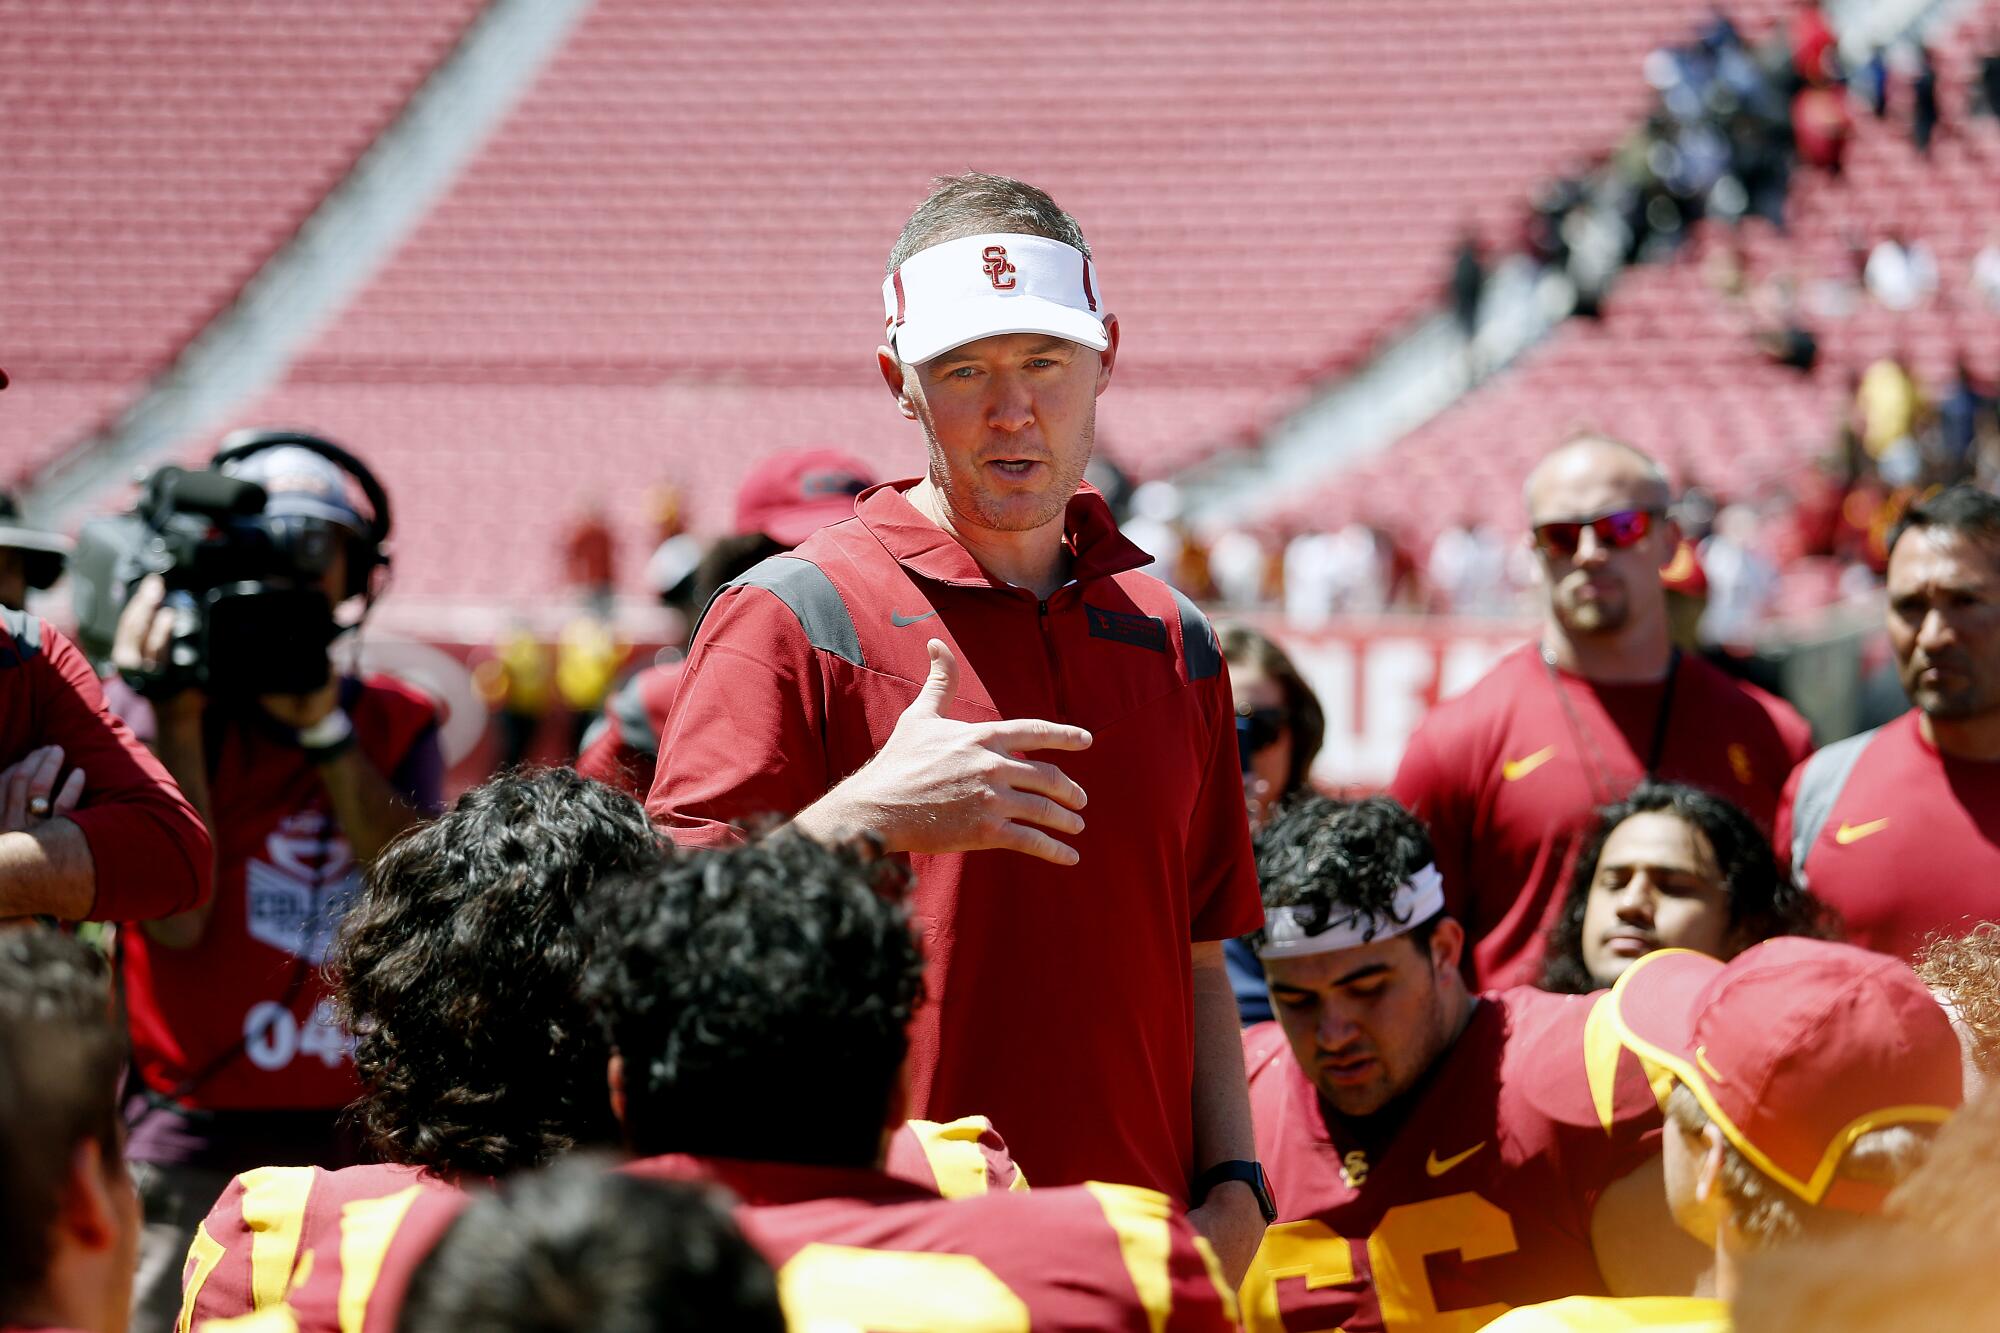 USC coach Lincoln Riley talks to the players at the end of the spring game.